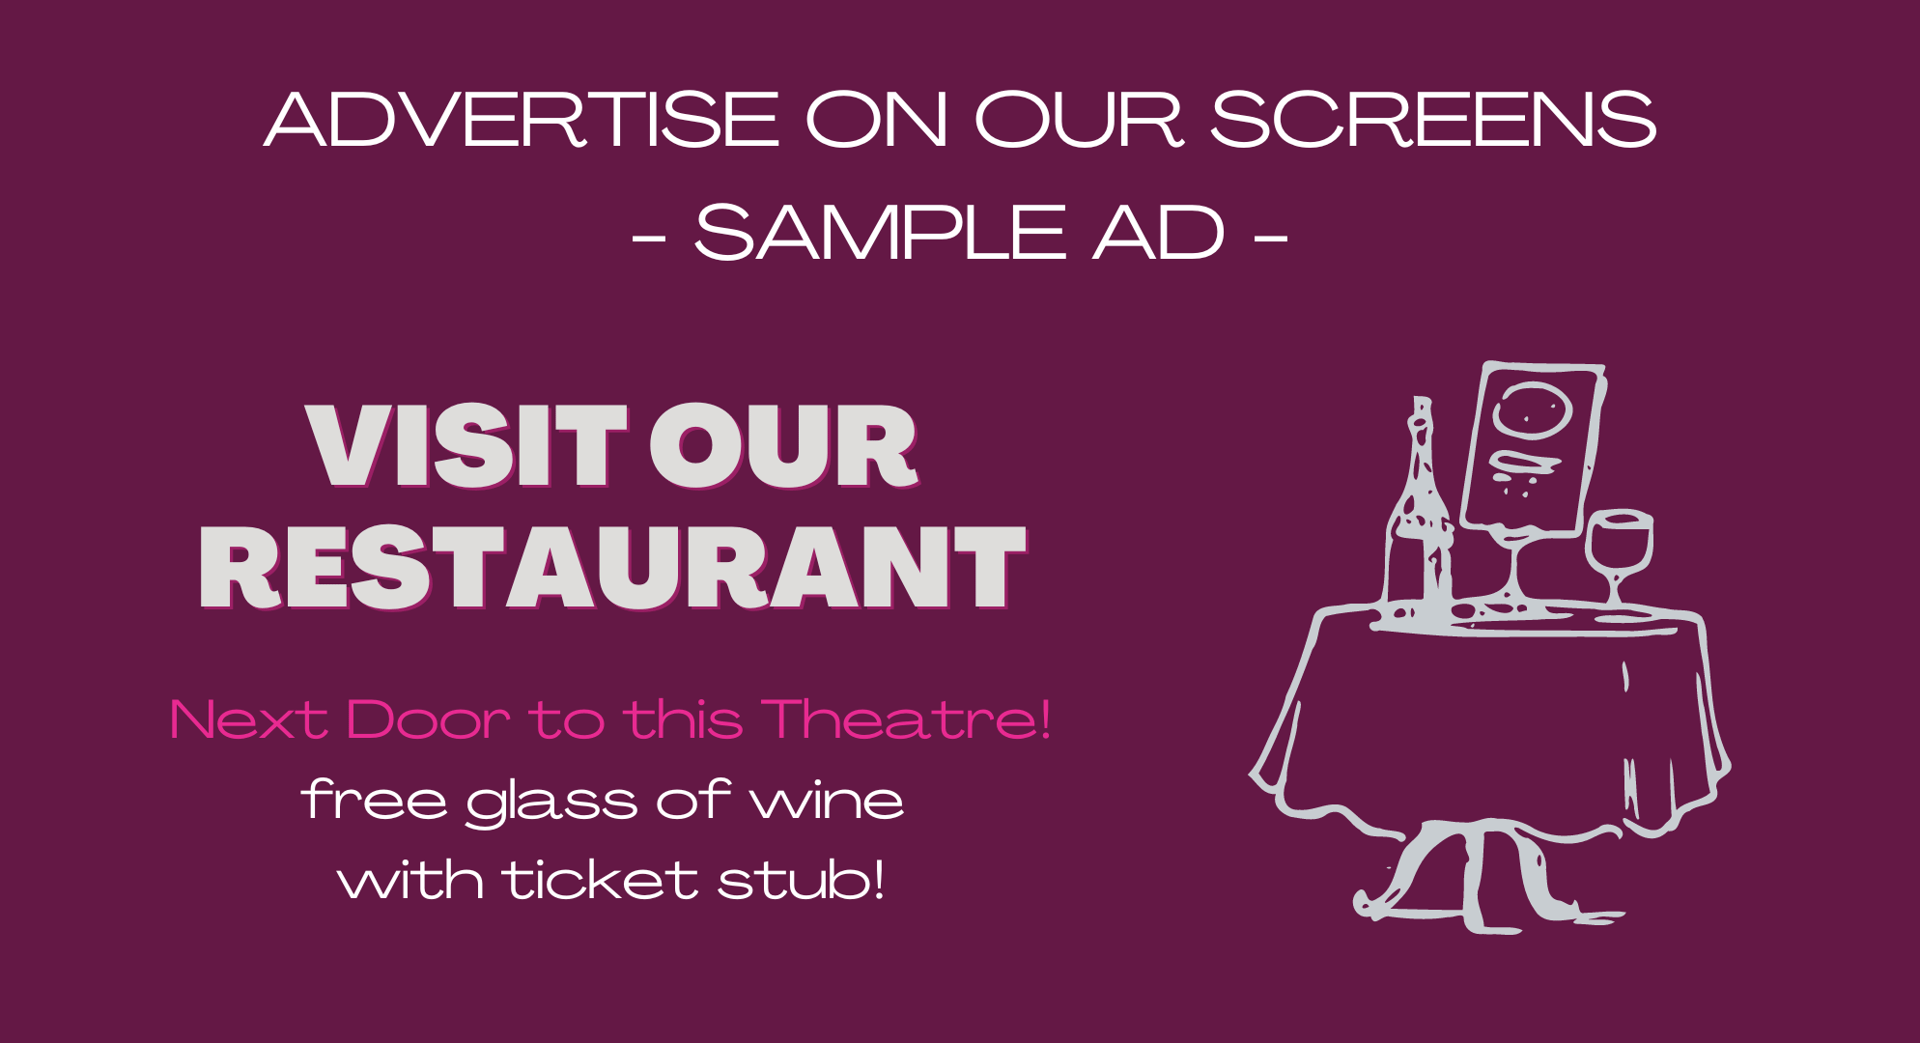 Advertise on Our Screens